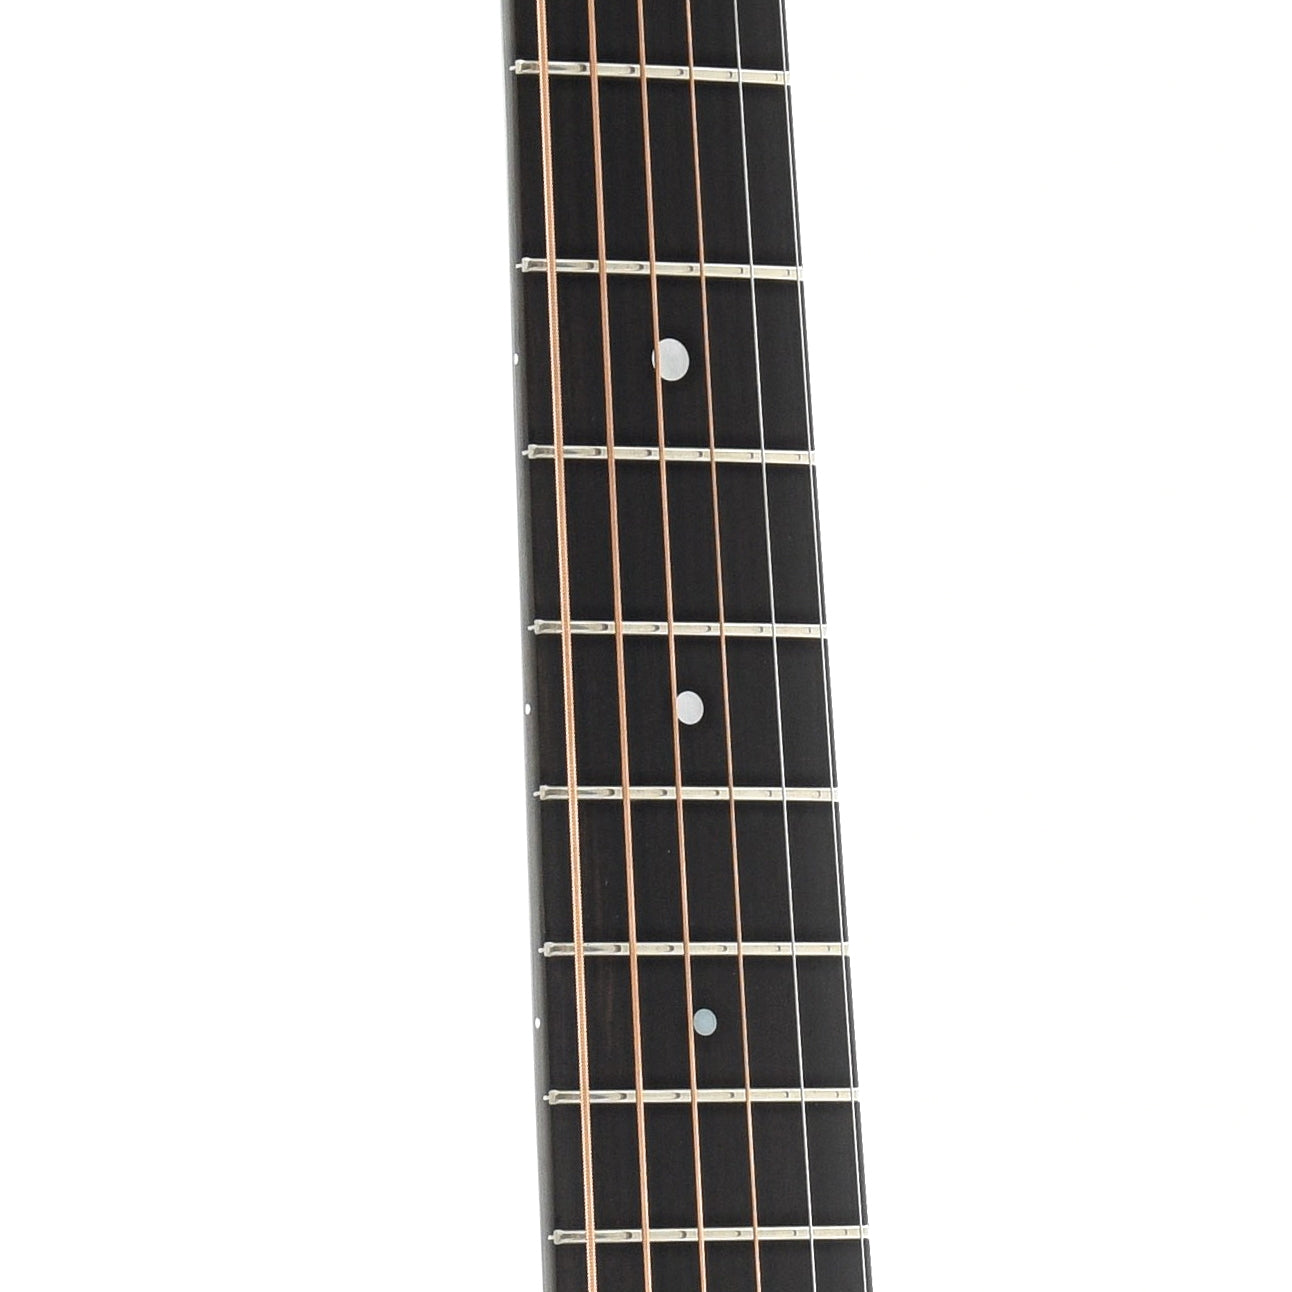 Image 5 of Pre-War Guitars Co. Triple-O Mahogany, Level 1 Aging - SKU# PW000M : Product Type Flat-top Guitars : Elderly Instruments